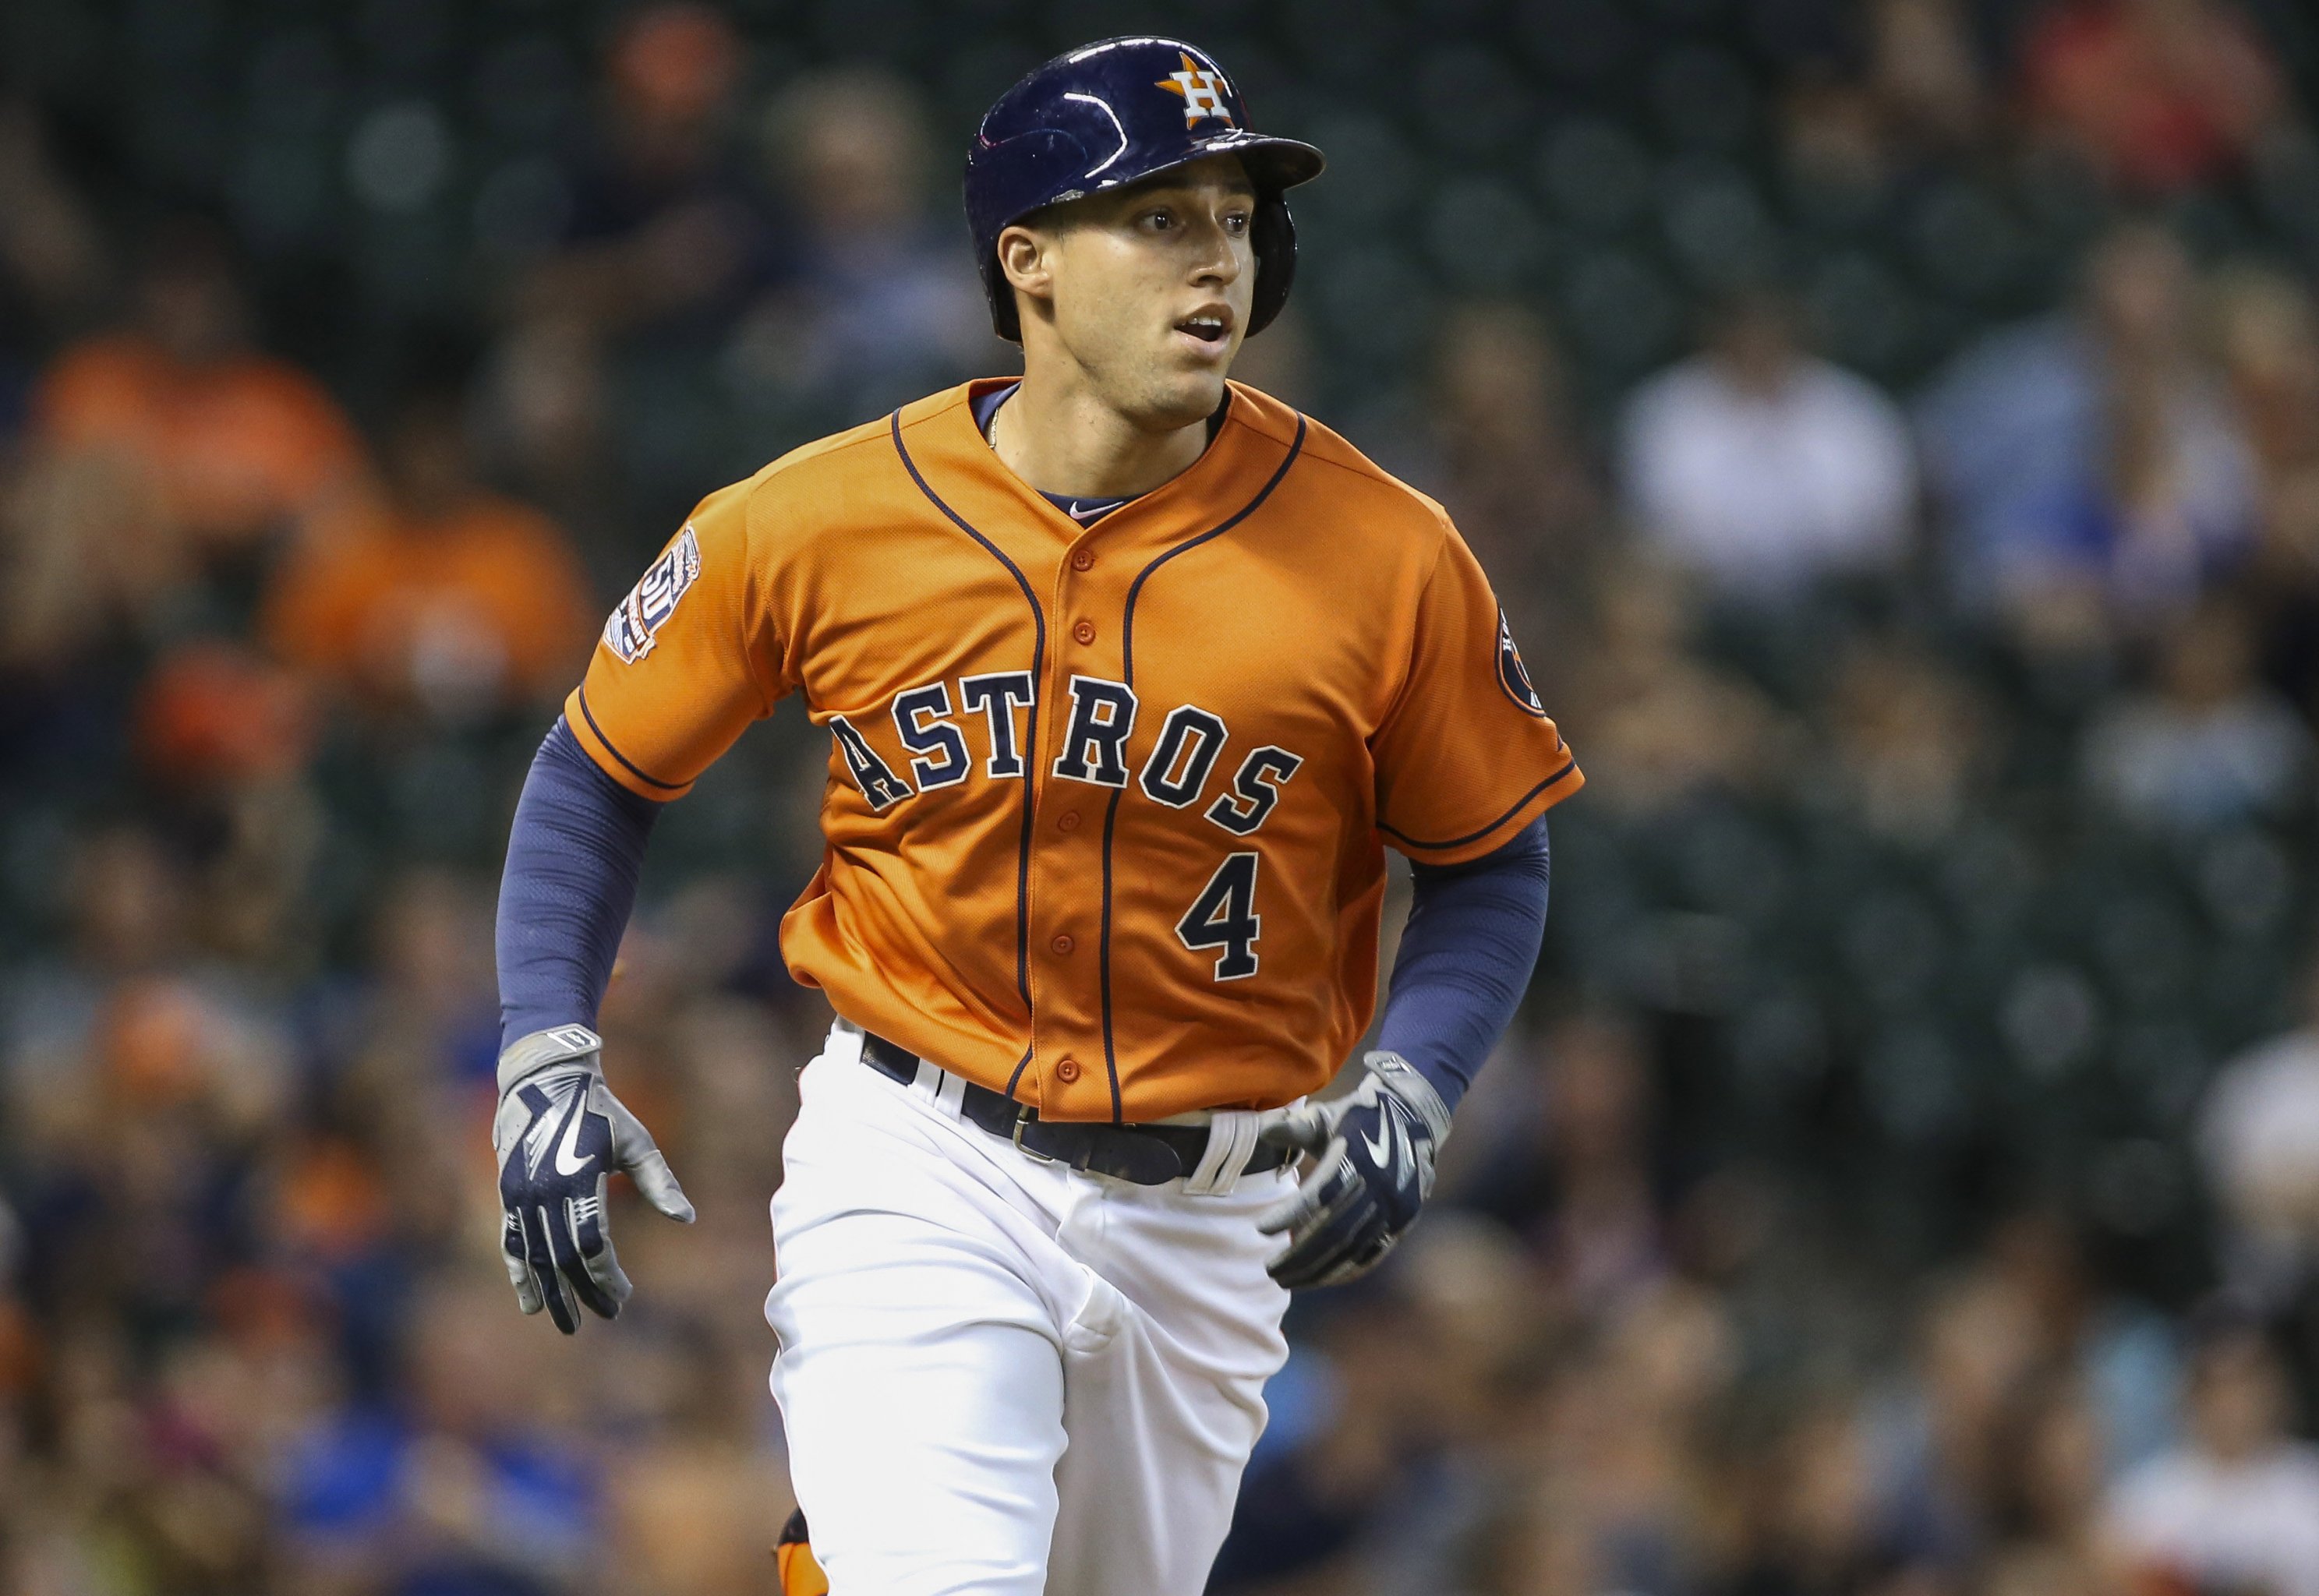 Return of Michael Brantley Is a Chemistry Play for Astros